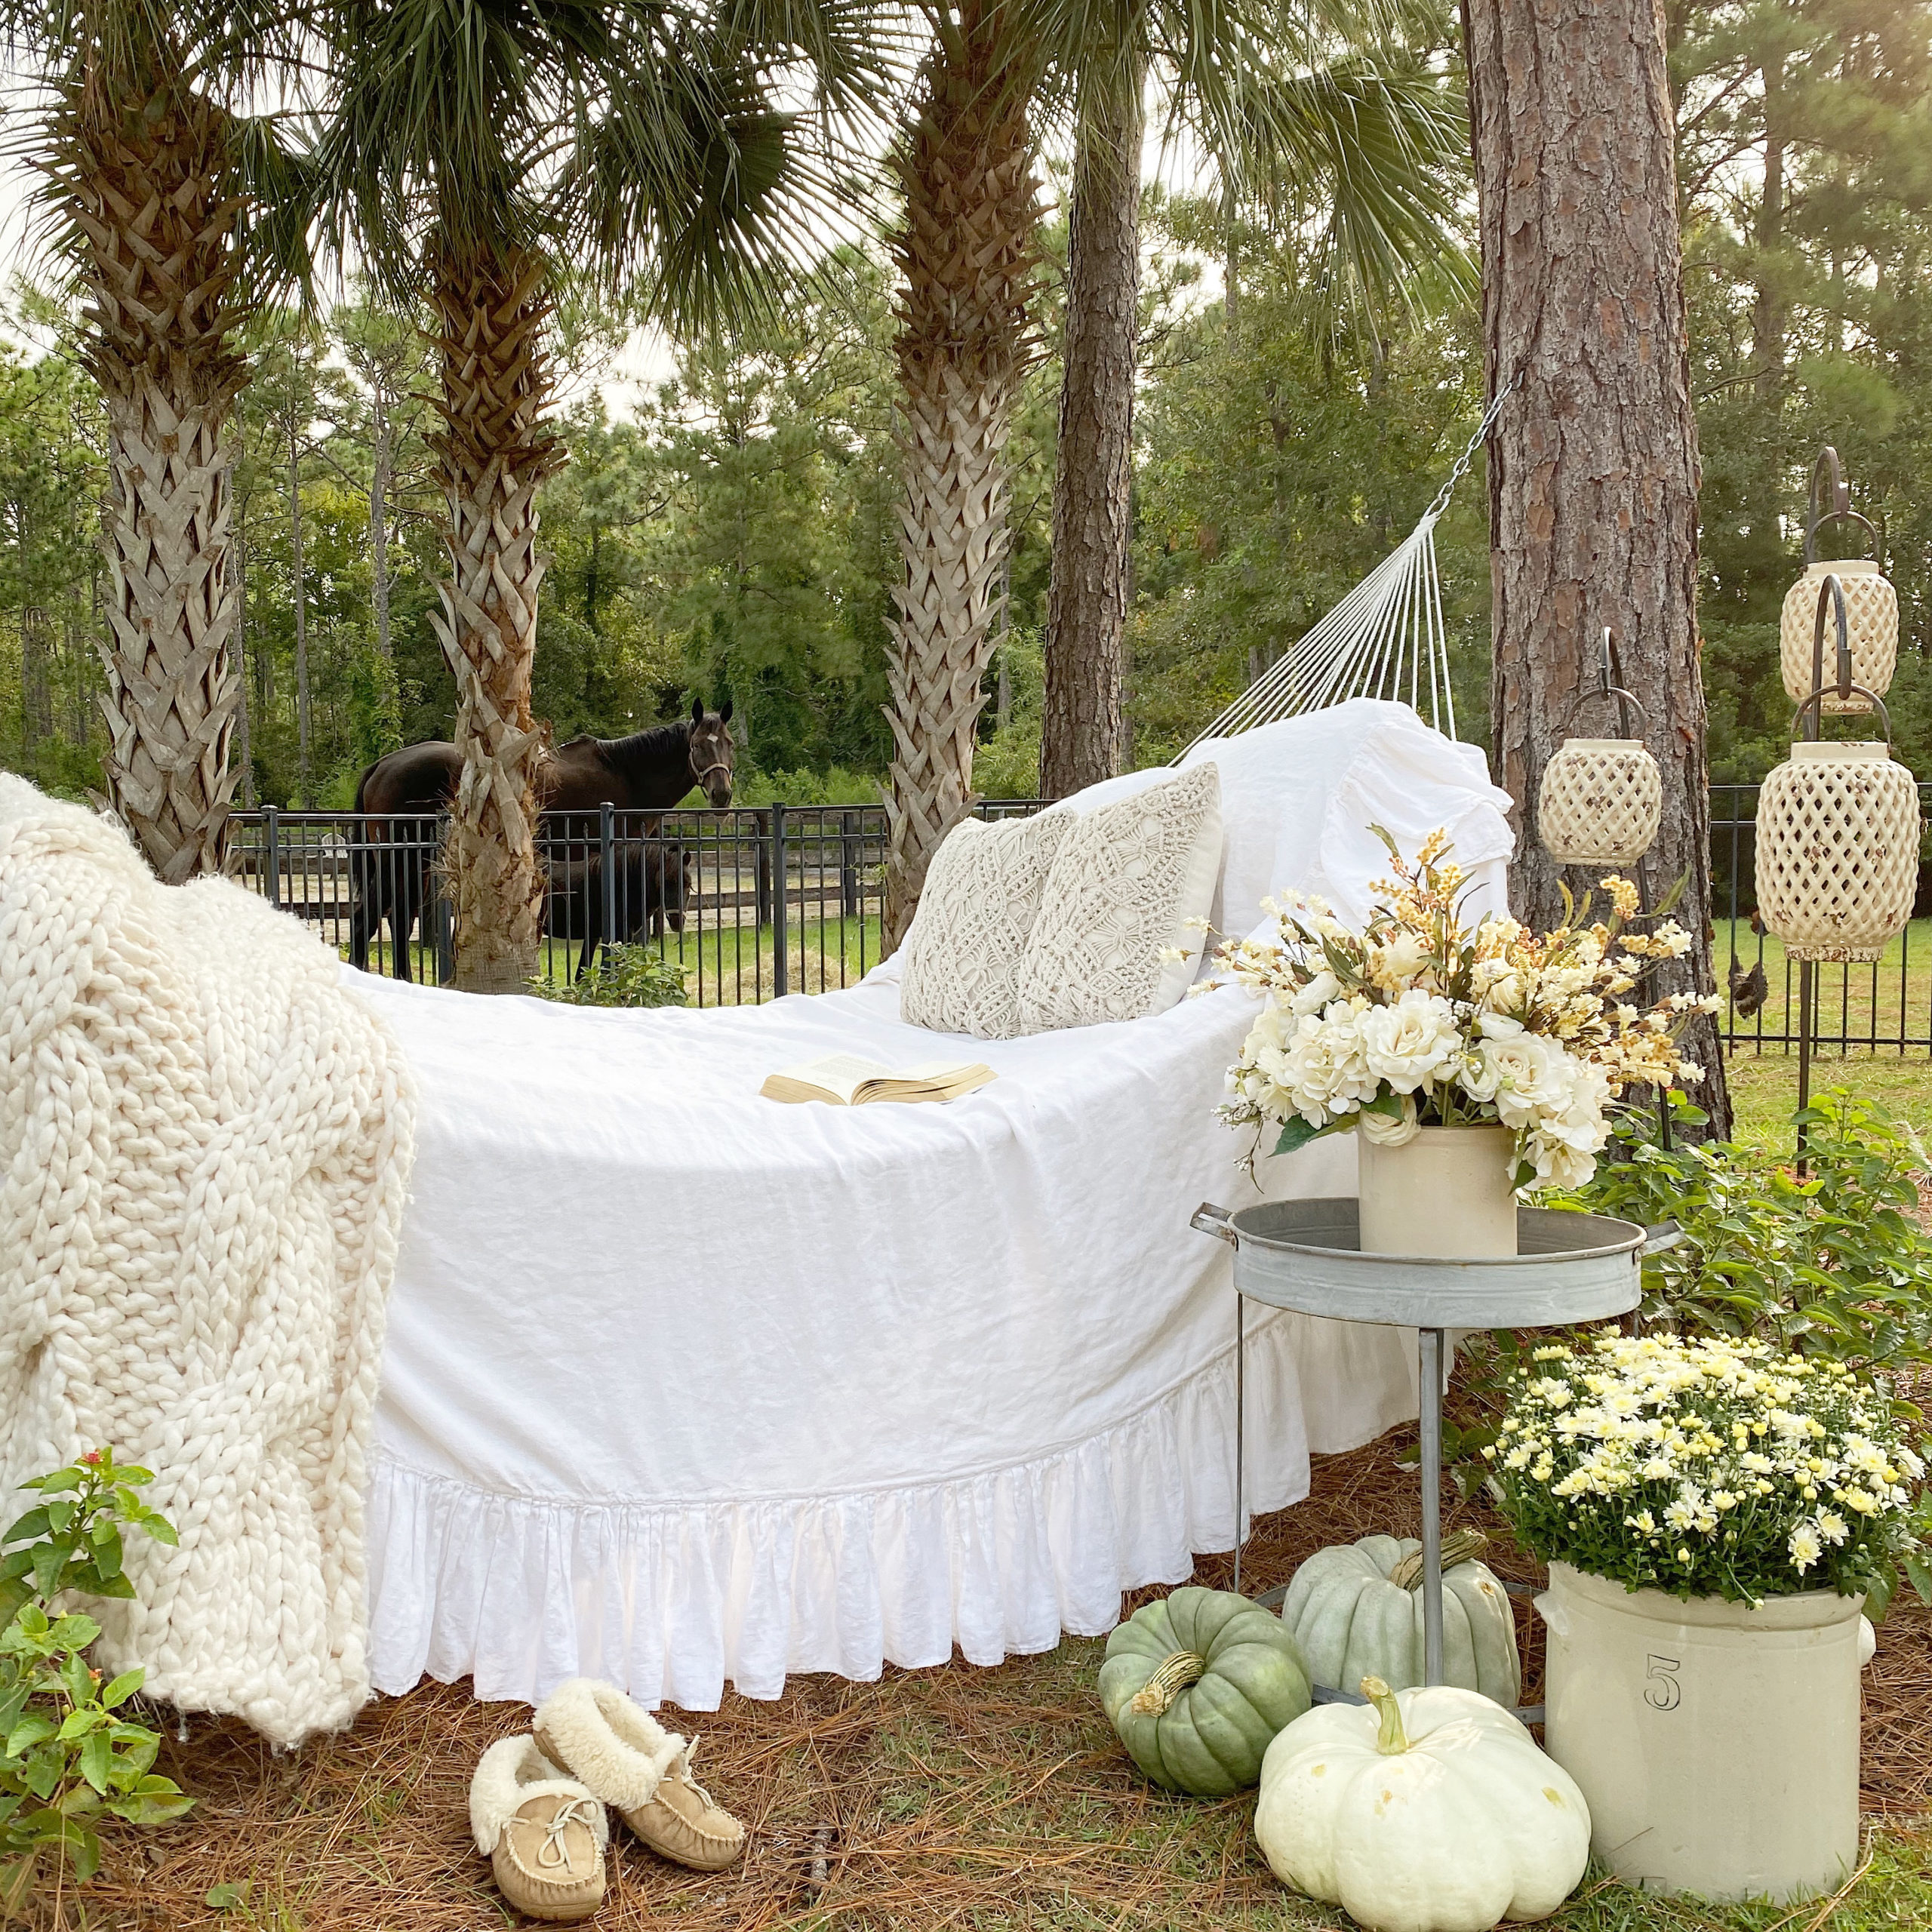 A cozy hammock set up for Fall with a ruffled white linen cover, a Fall floral arrangement on a metal table next to it and pumpkins and mums for decoration around it.